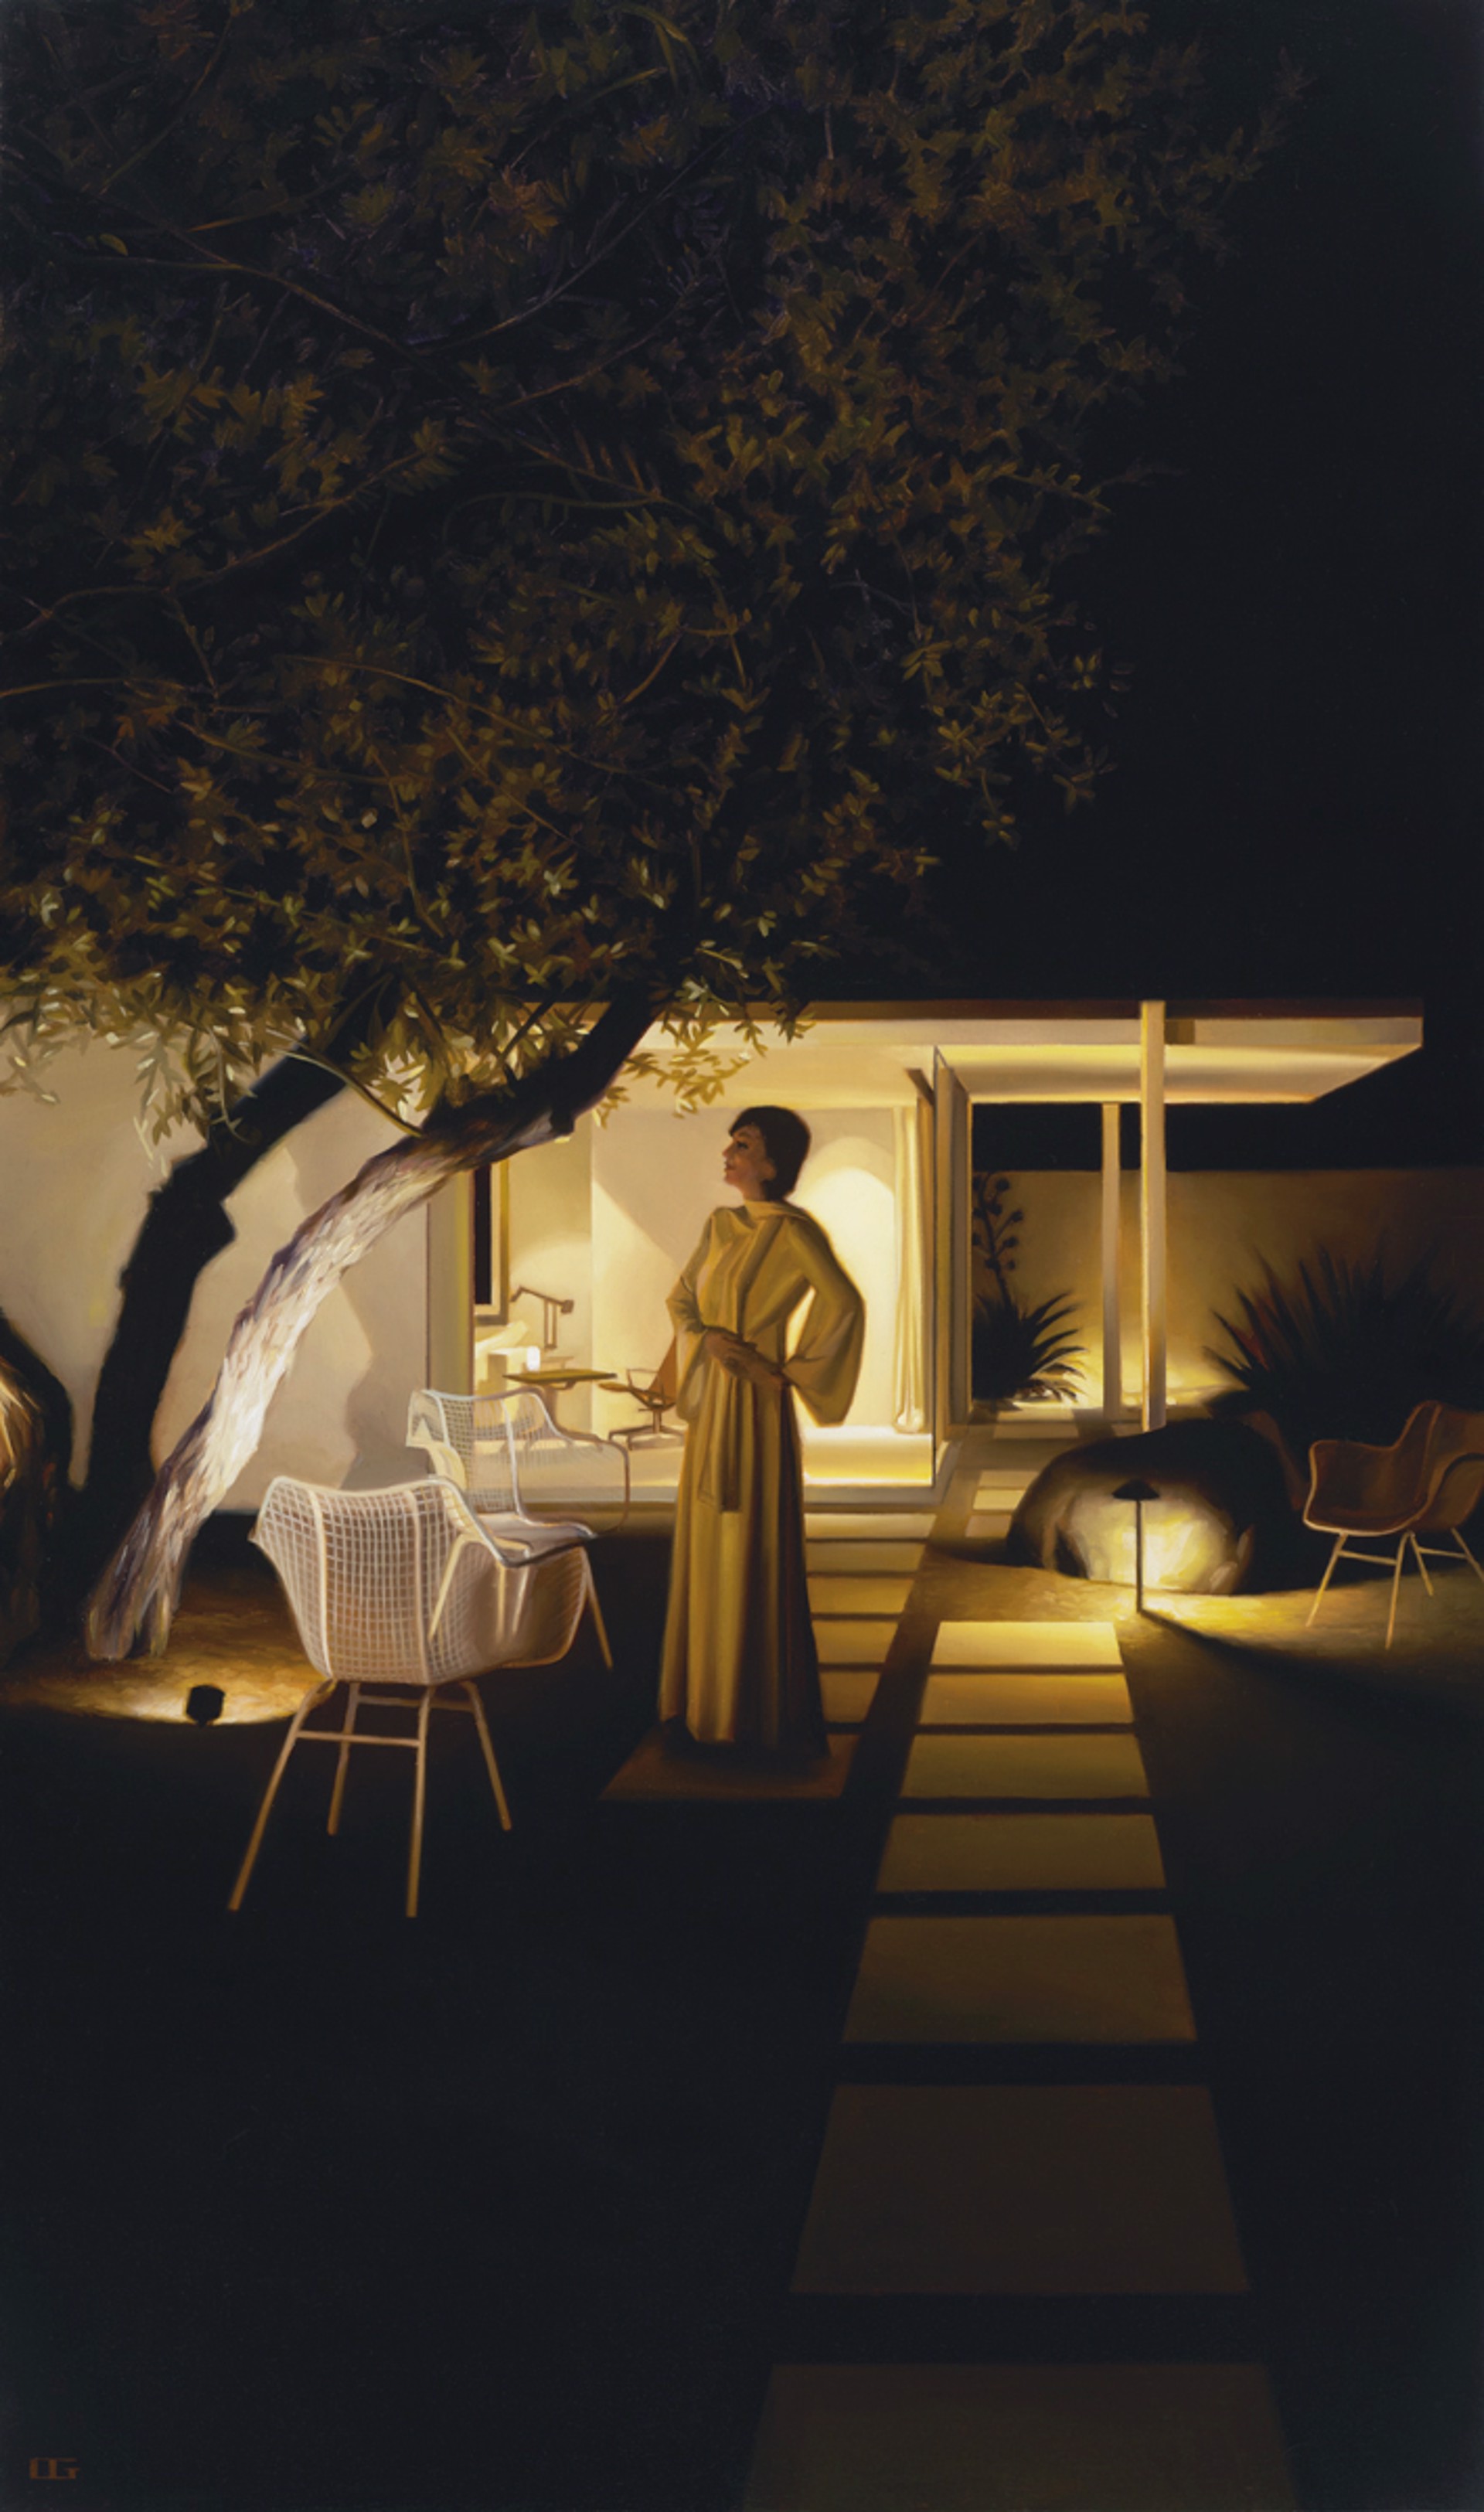 The Glass House (S/N) by Carrie Graber